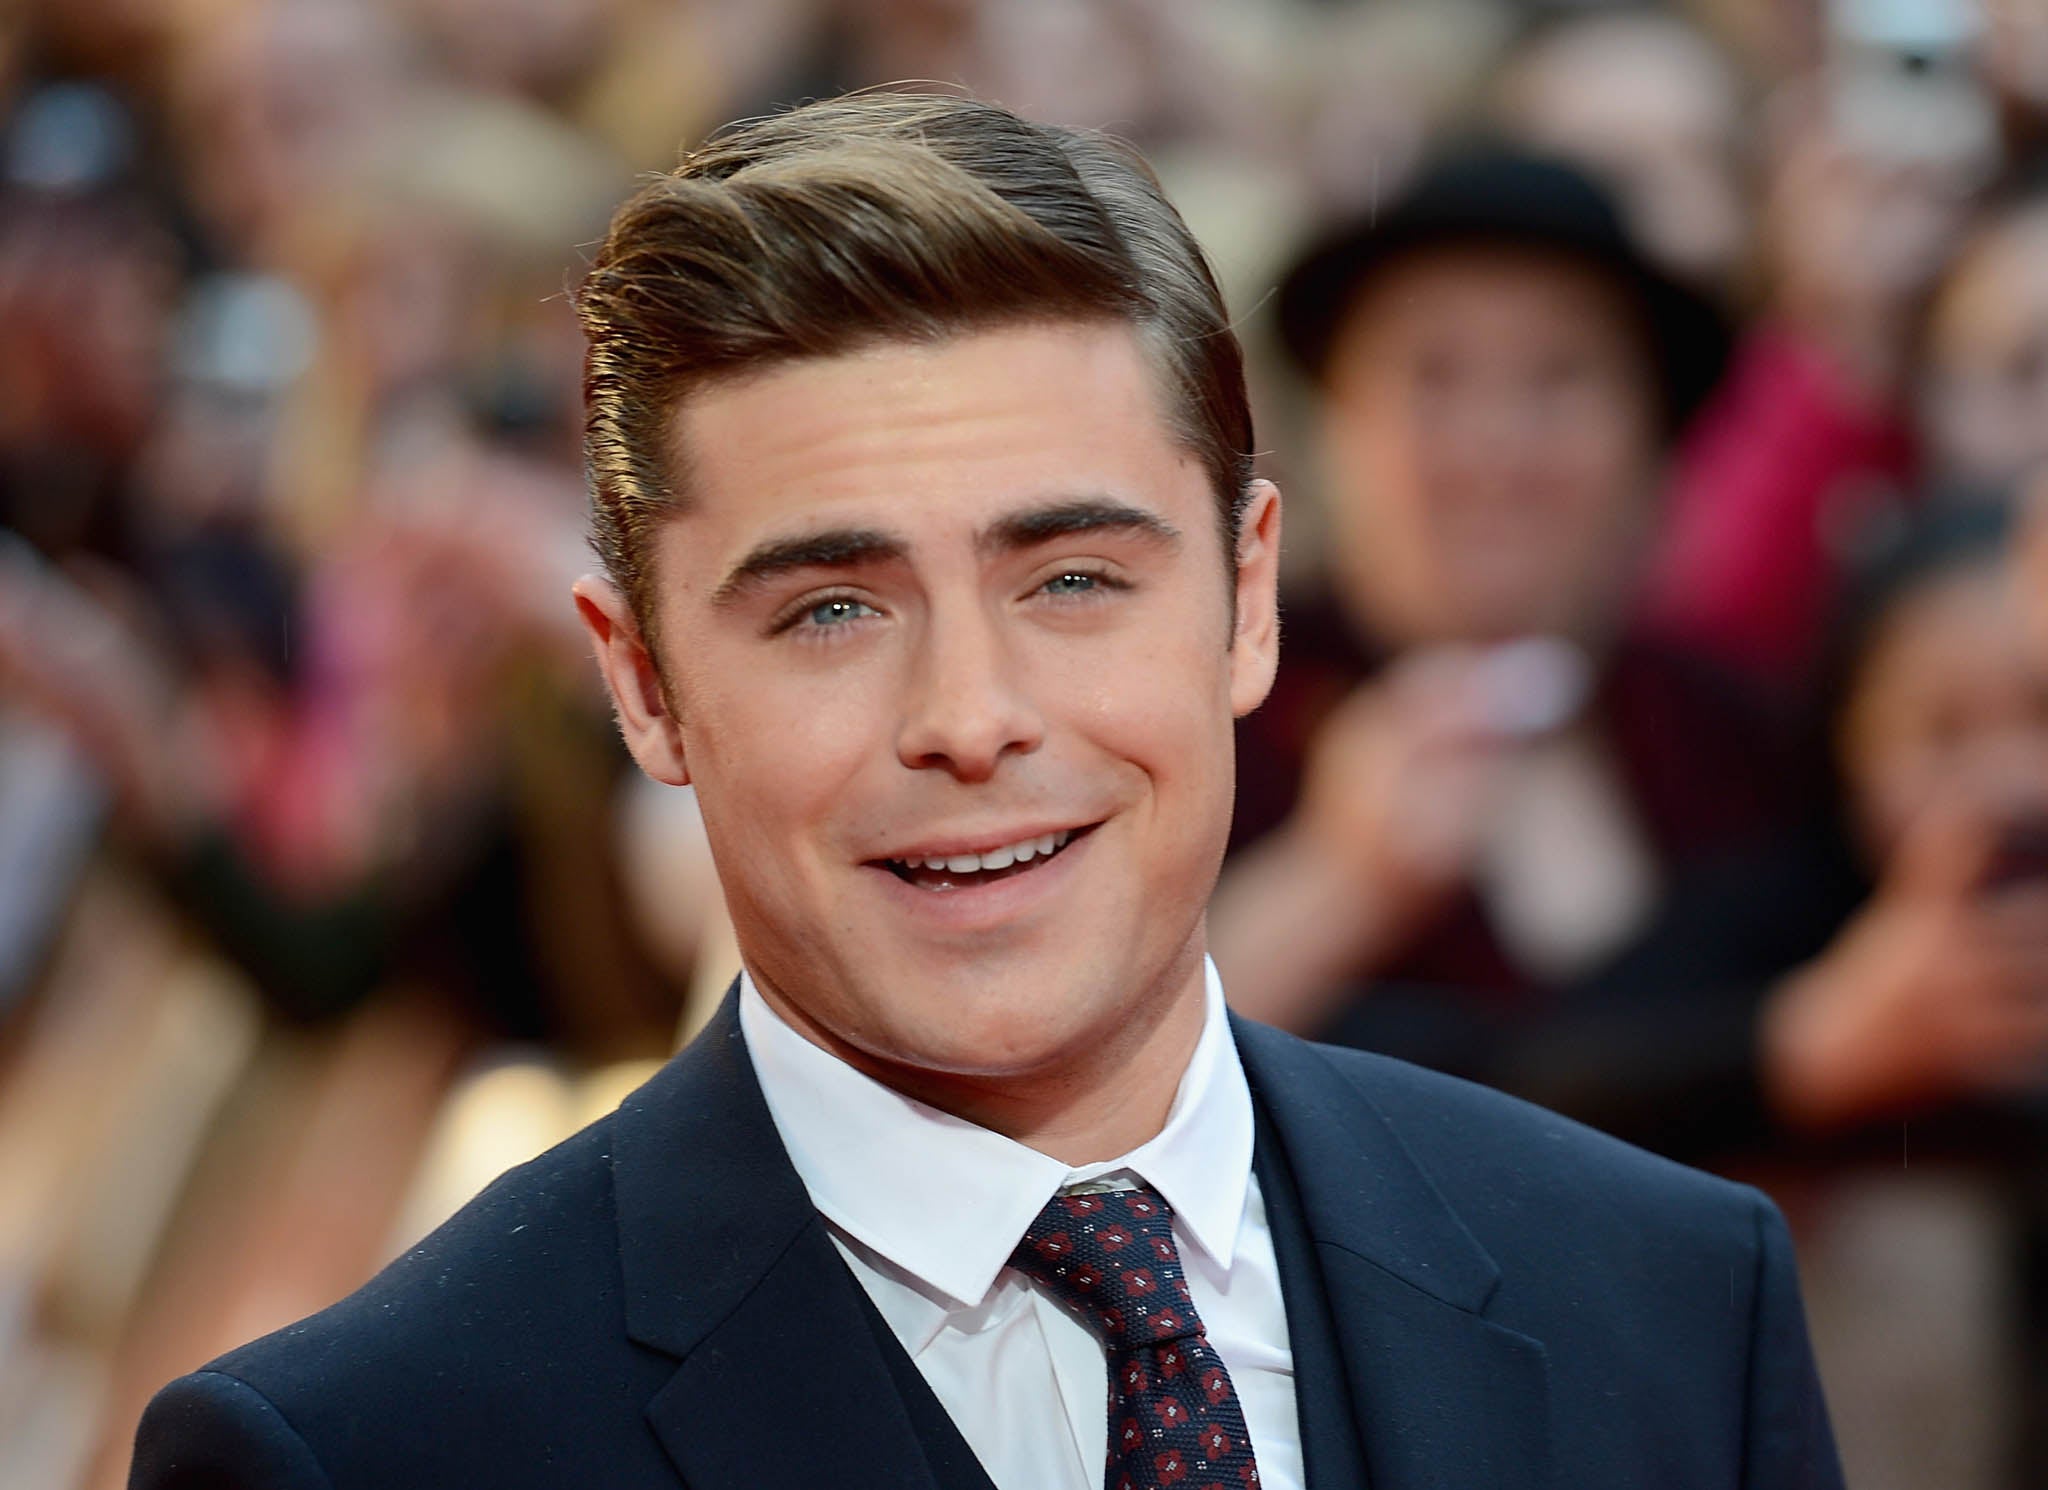 High School Musical star Zac Efron has been rumoured for the lead role in Fox's Grease Live